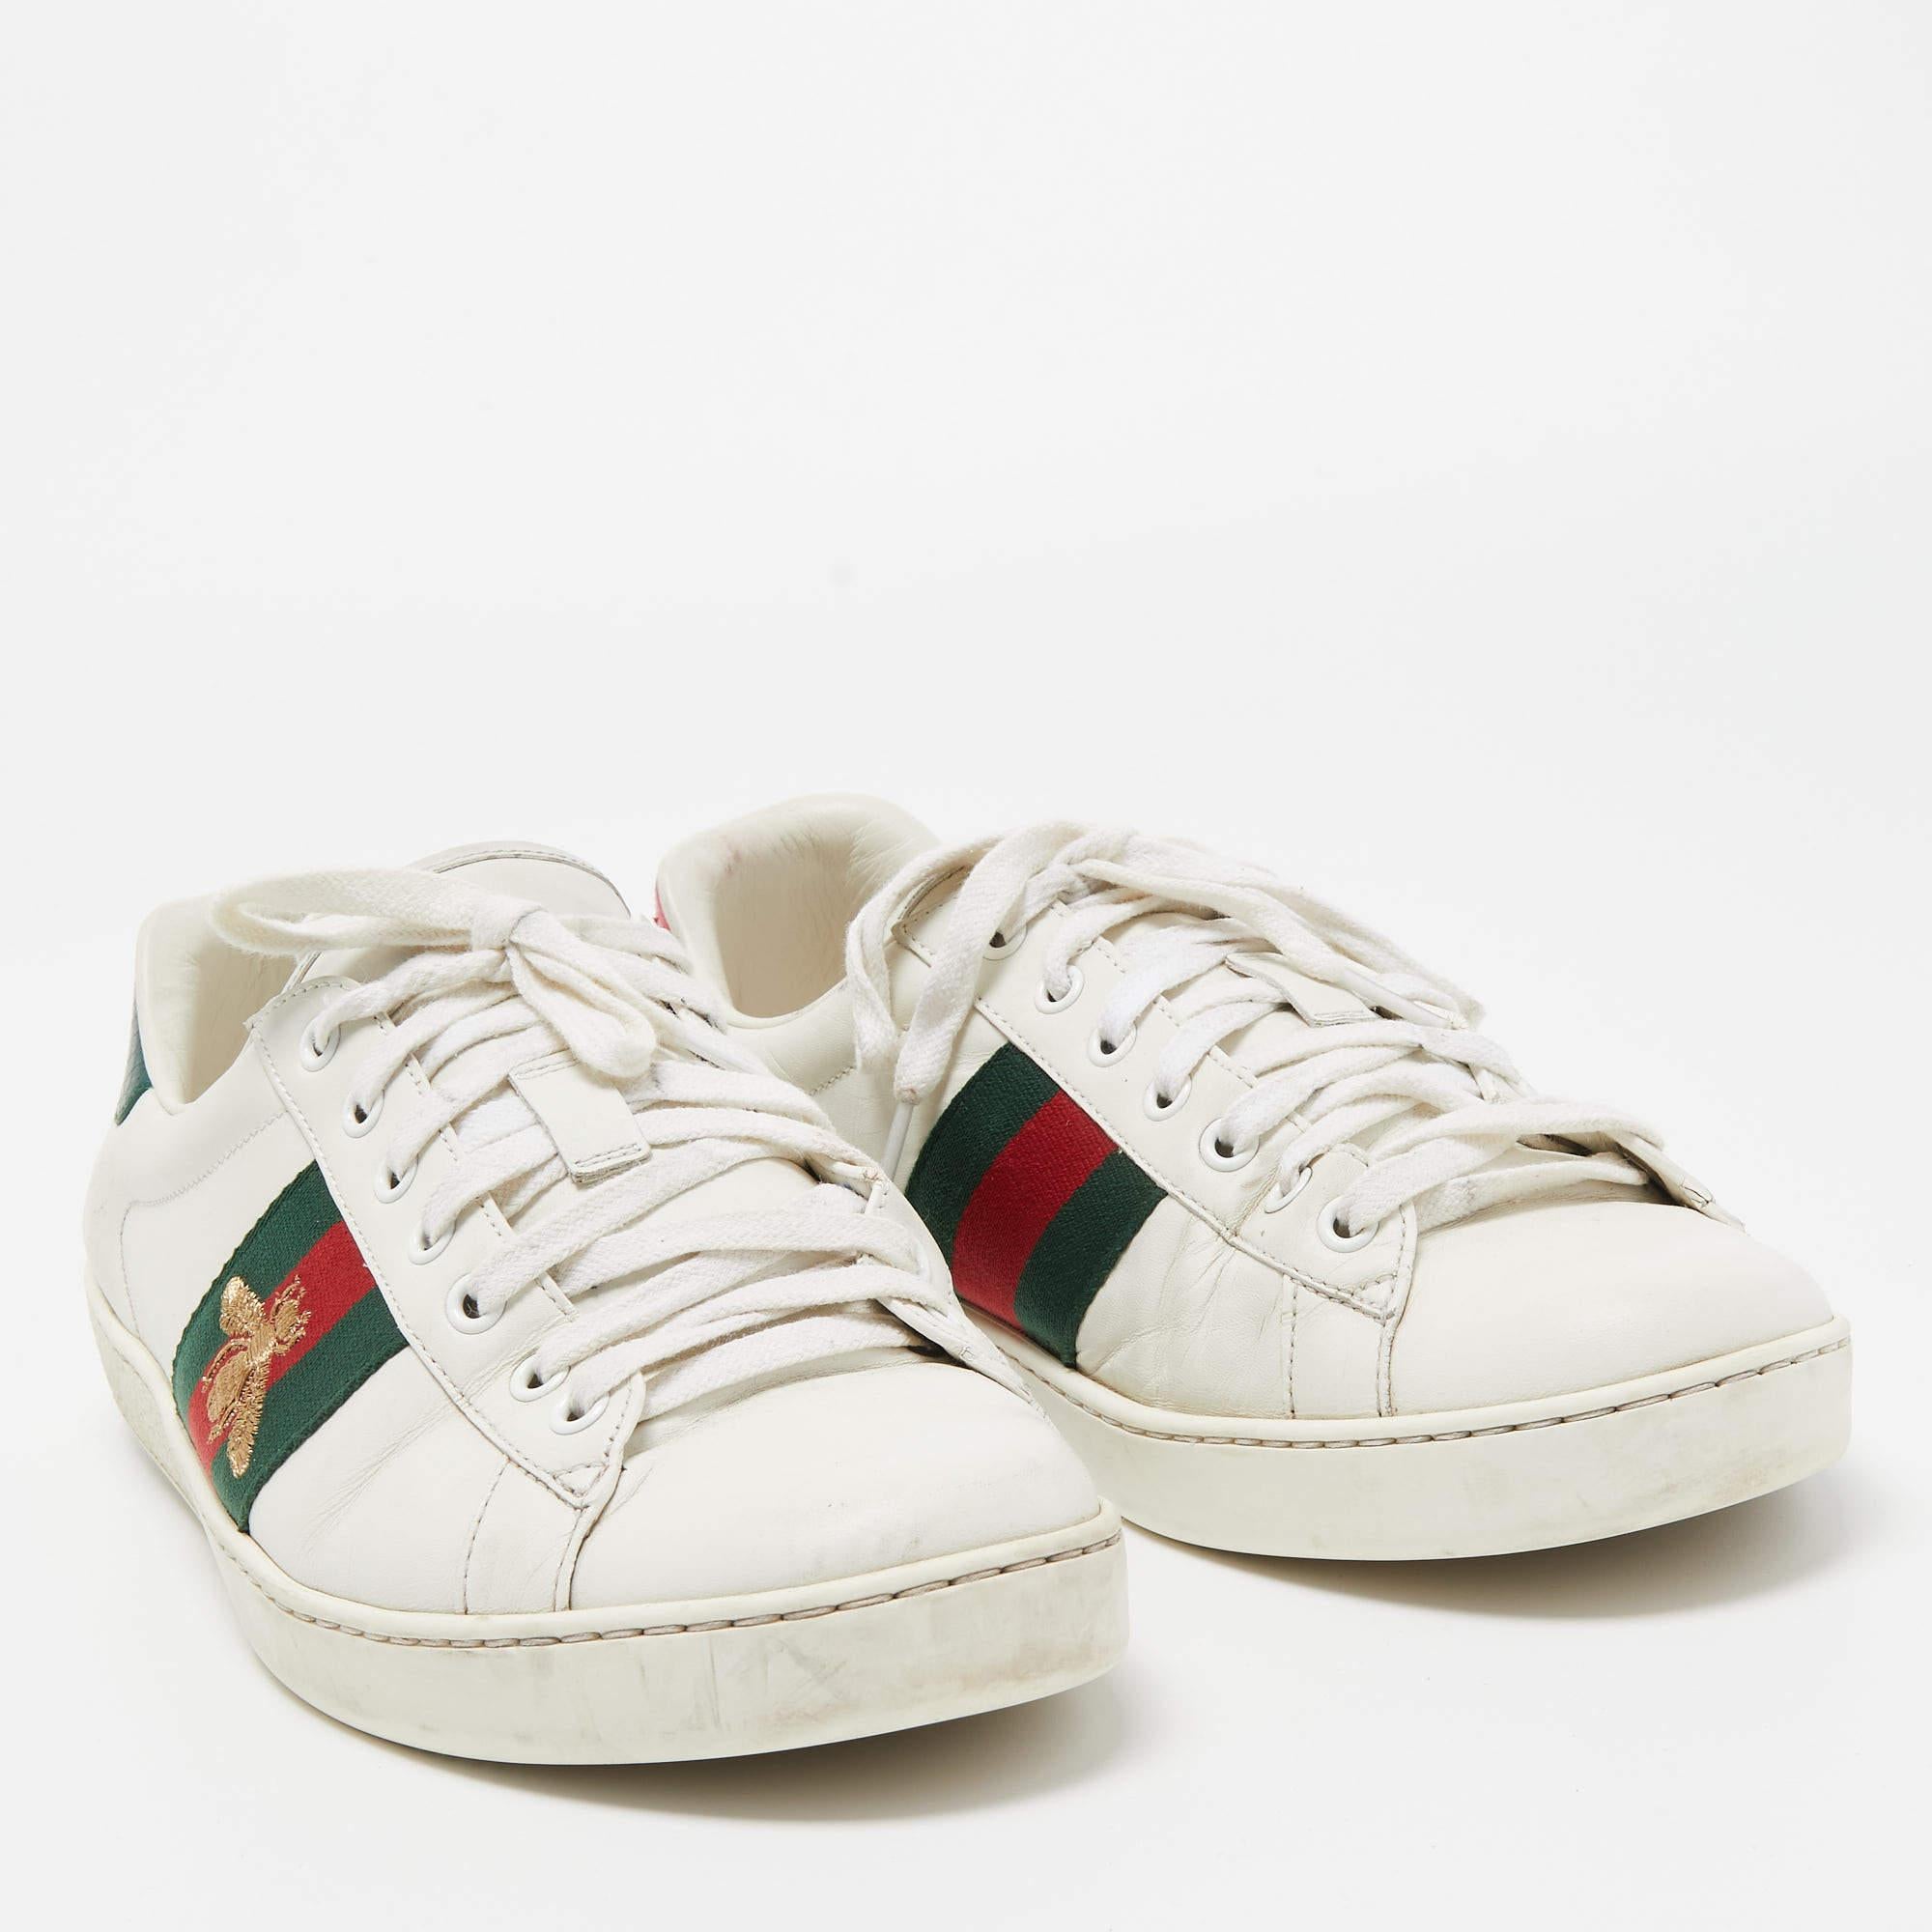 Gucci White Leather Embroidered Bee Ace Sneakers Size 43 In Fair Condition For Sale In Dubai, Al Qouz 2